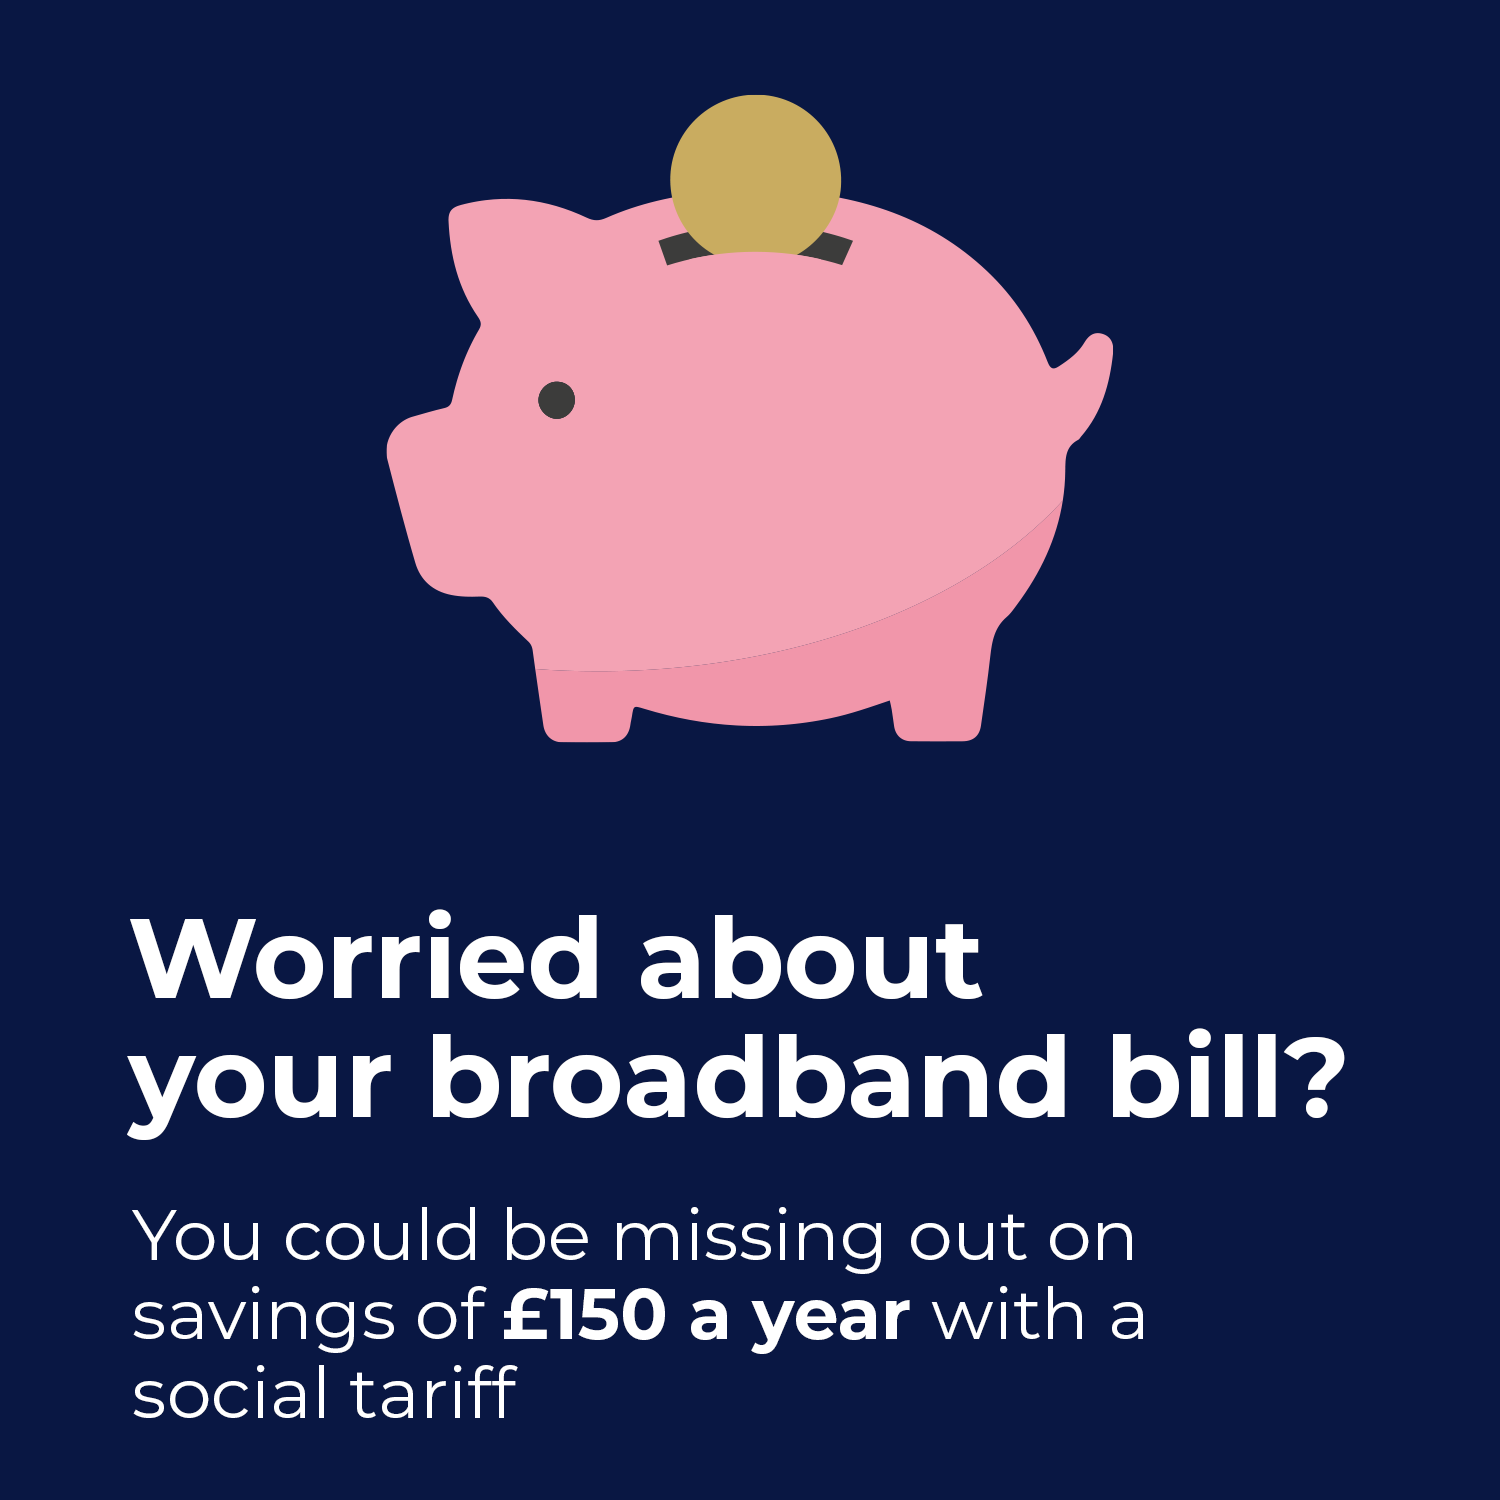 Worried about your broadband bill?